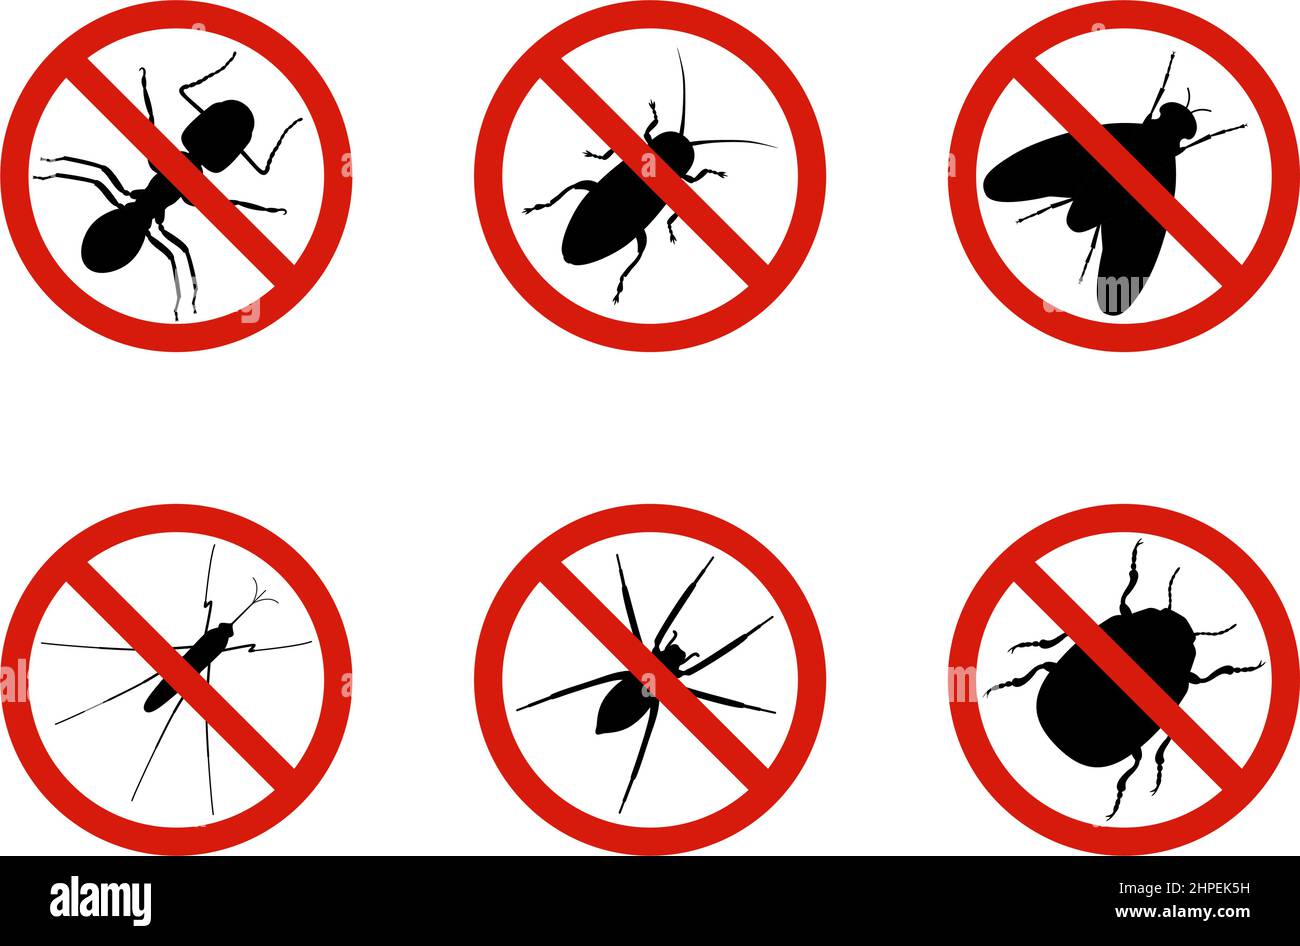 Stop insects signs, vector illustration Stock Vector